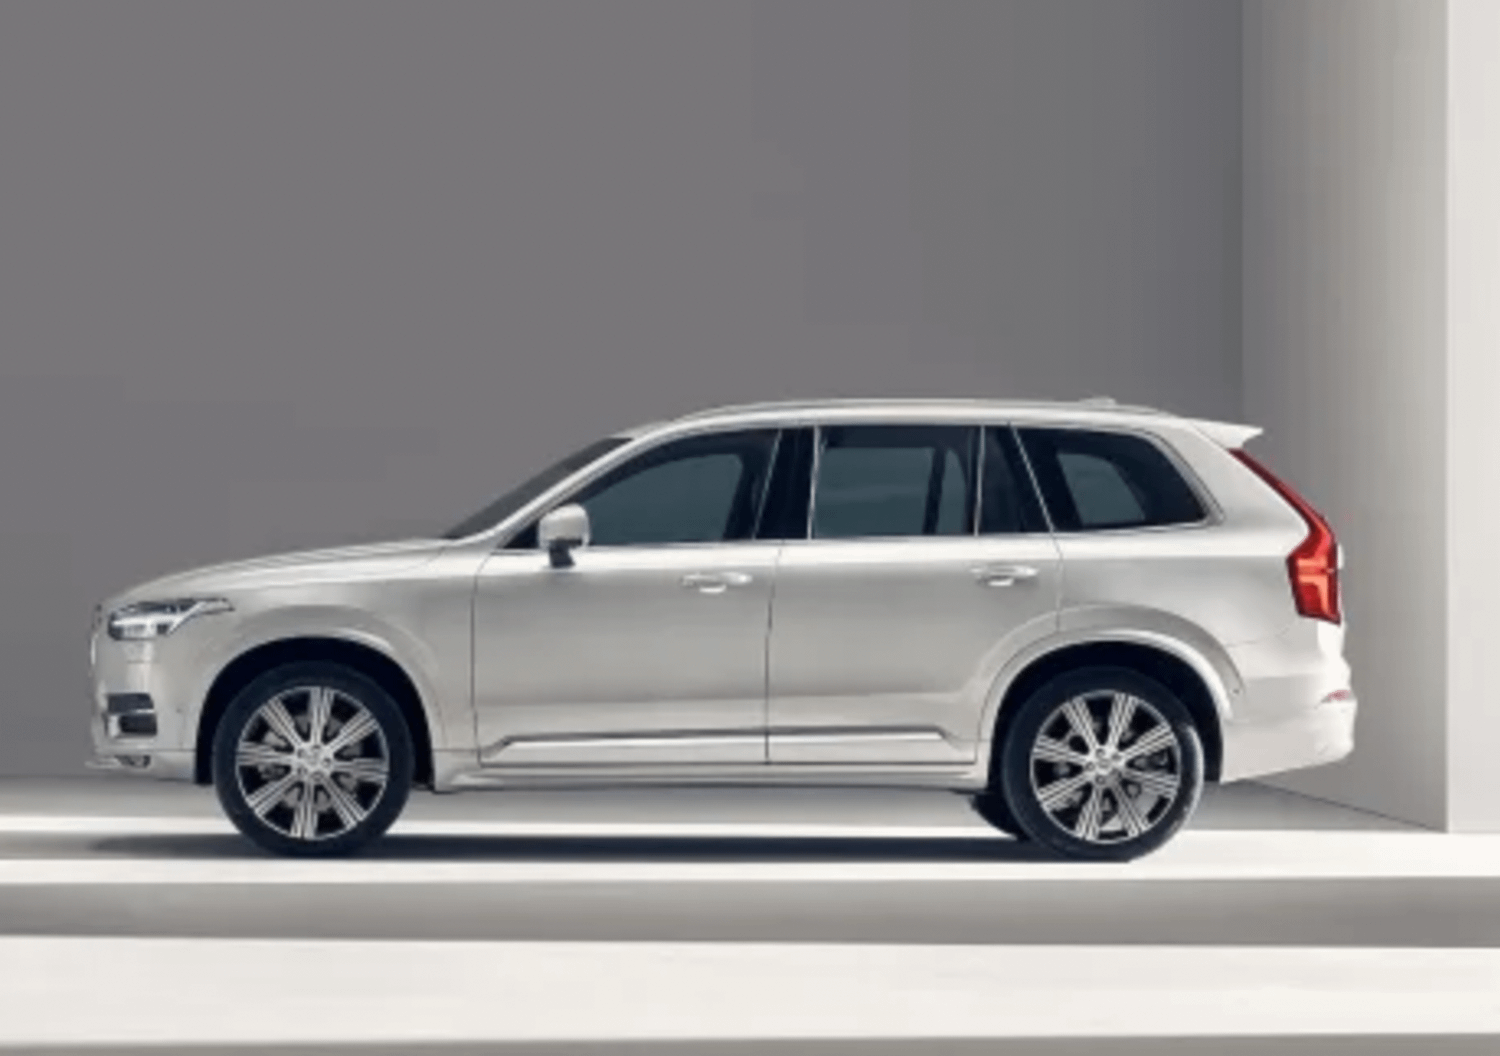 View Volvo XC90 Offers